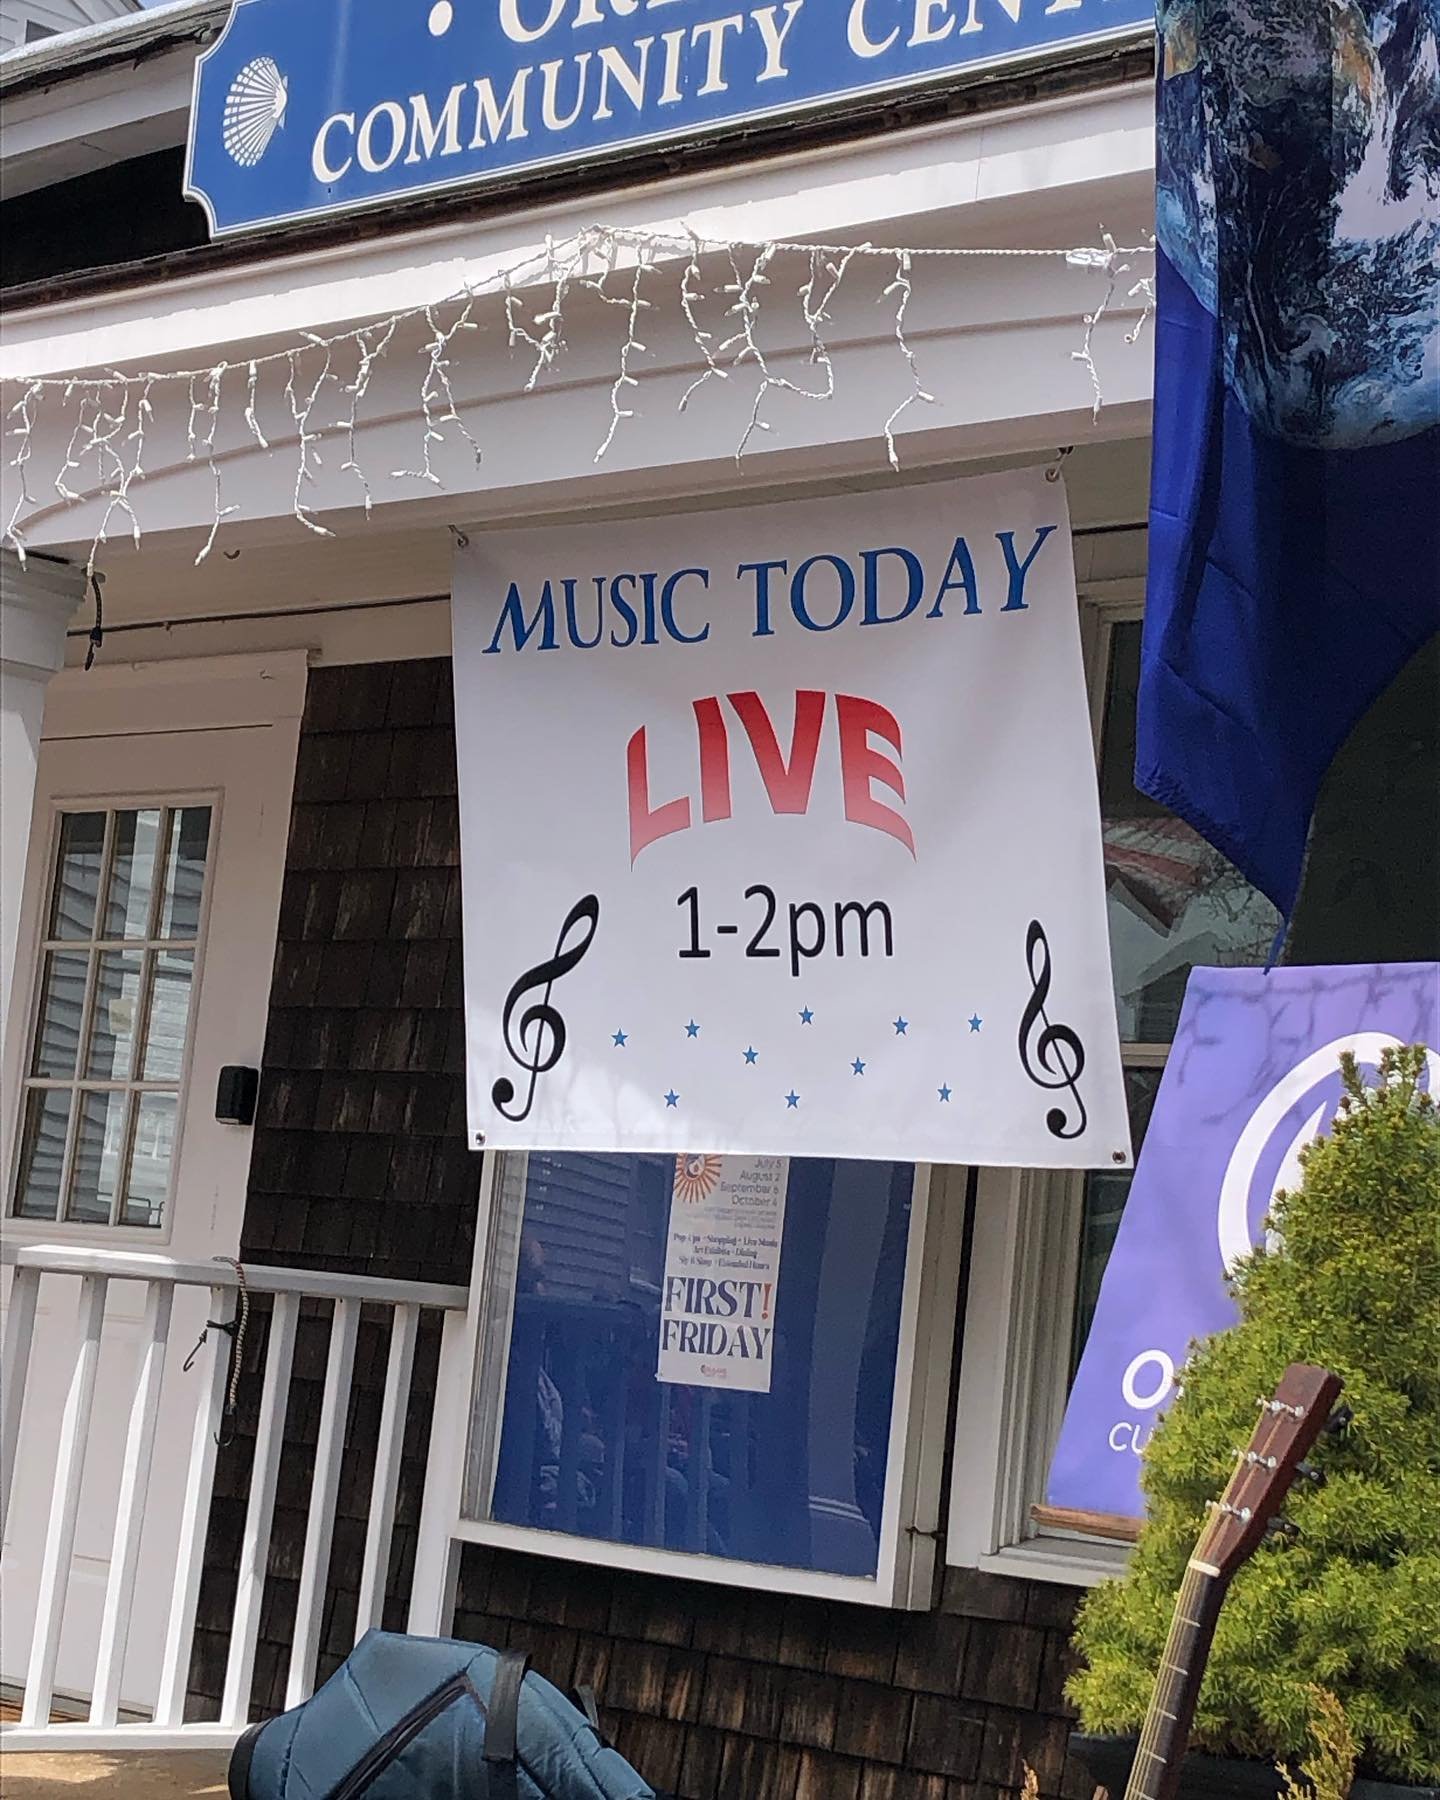 Join us this Saturday- rain or shine, in welcoming  the Free Radicals, Steve Reuman and Jay Snow.
1-2
44 Main St Orleans 
Free! 

#livemusic #community #orleansculturaldistrict #orleanmassachusetts